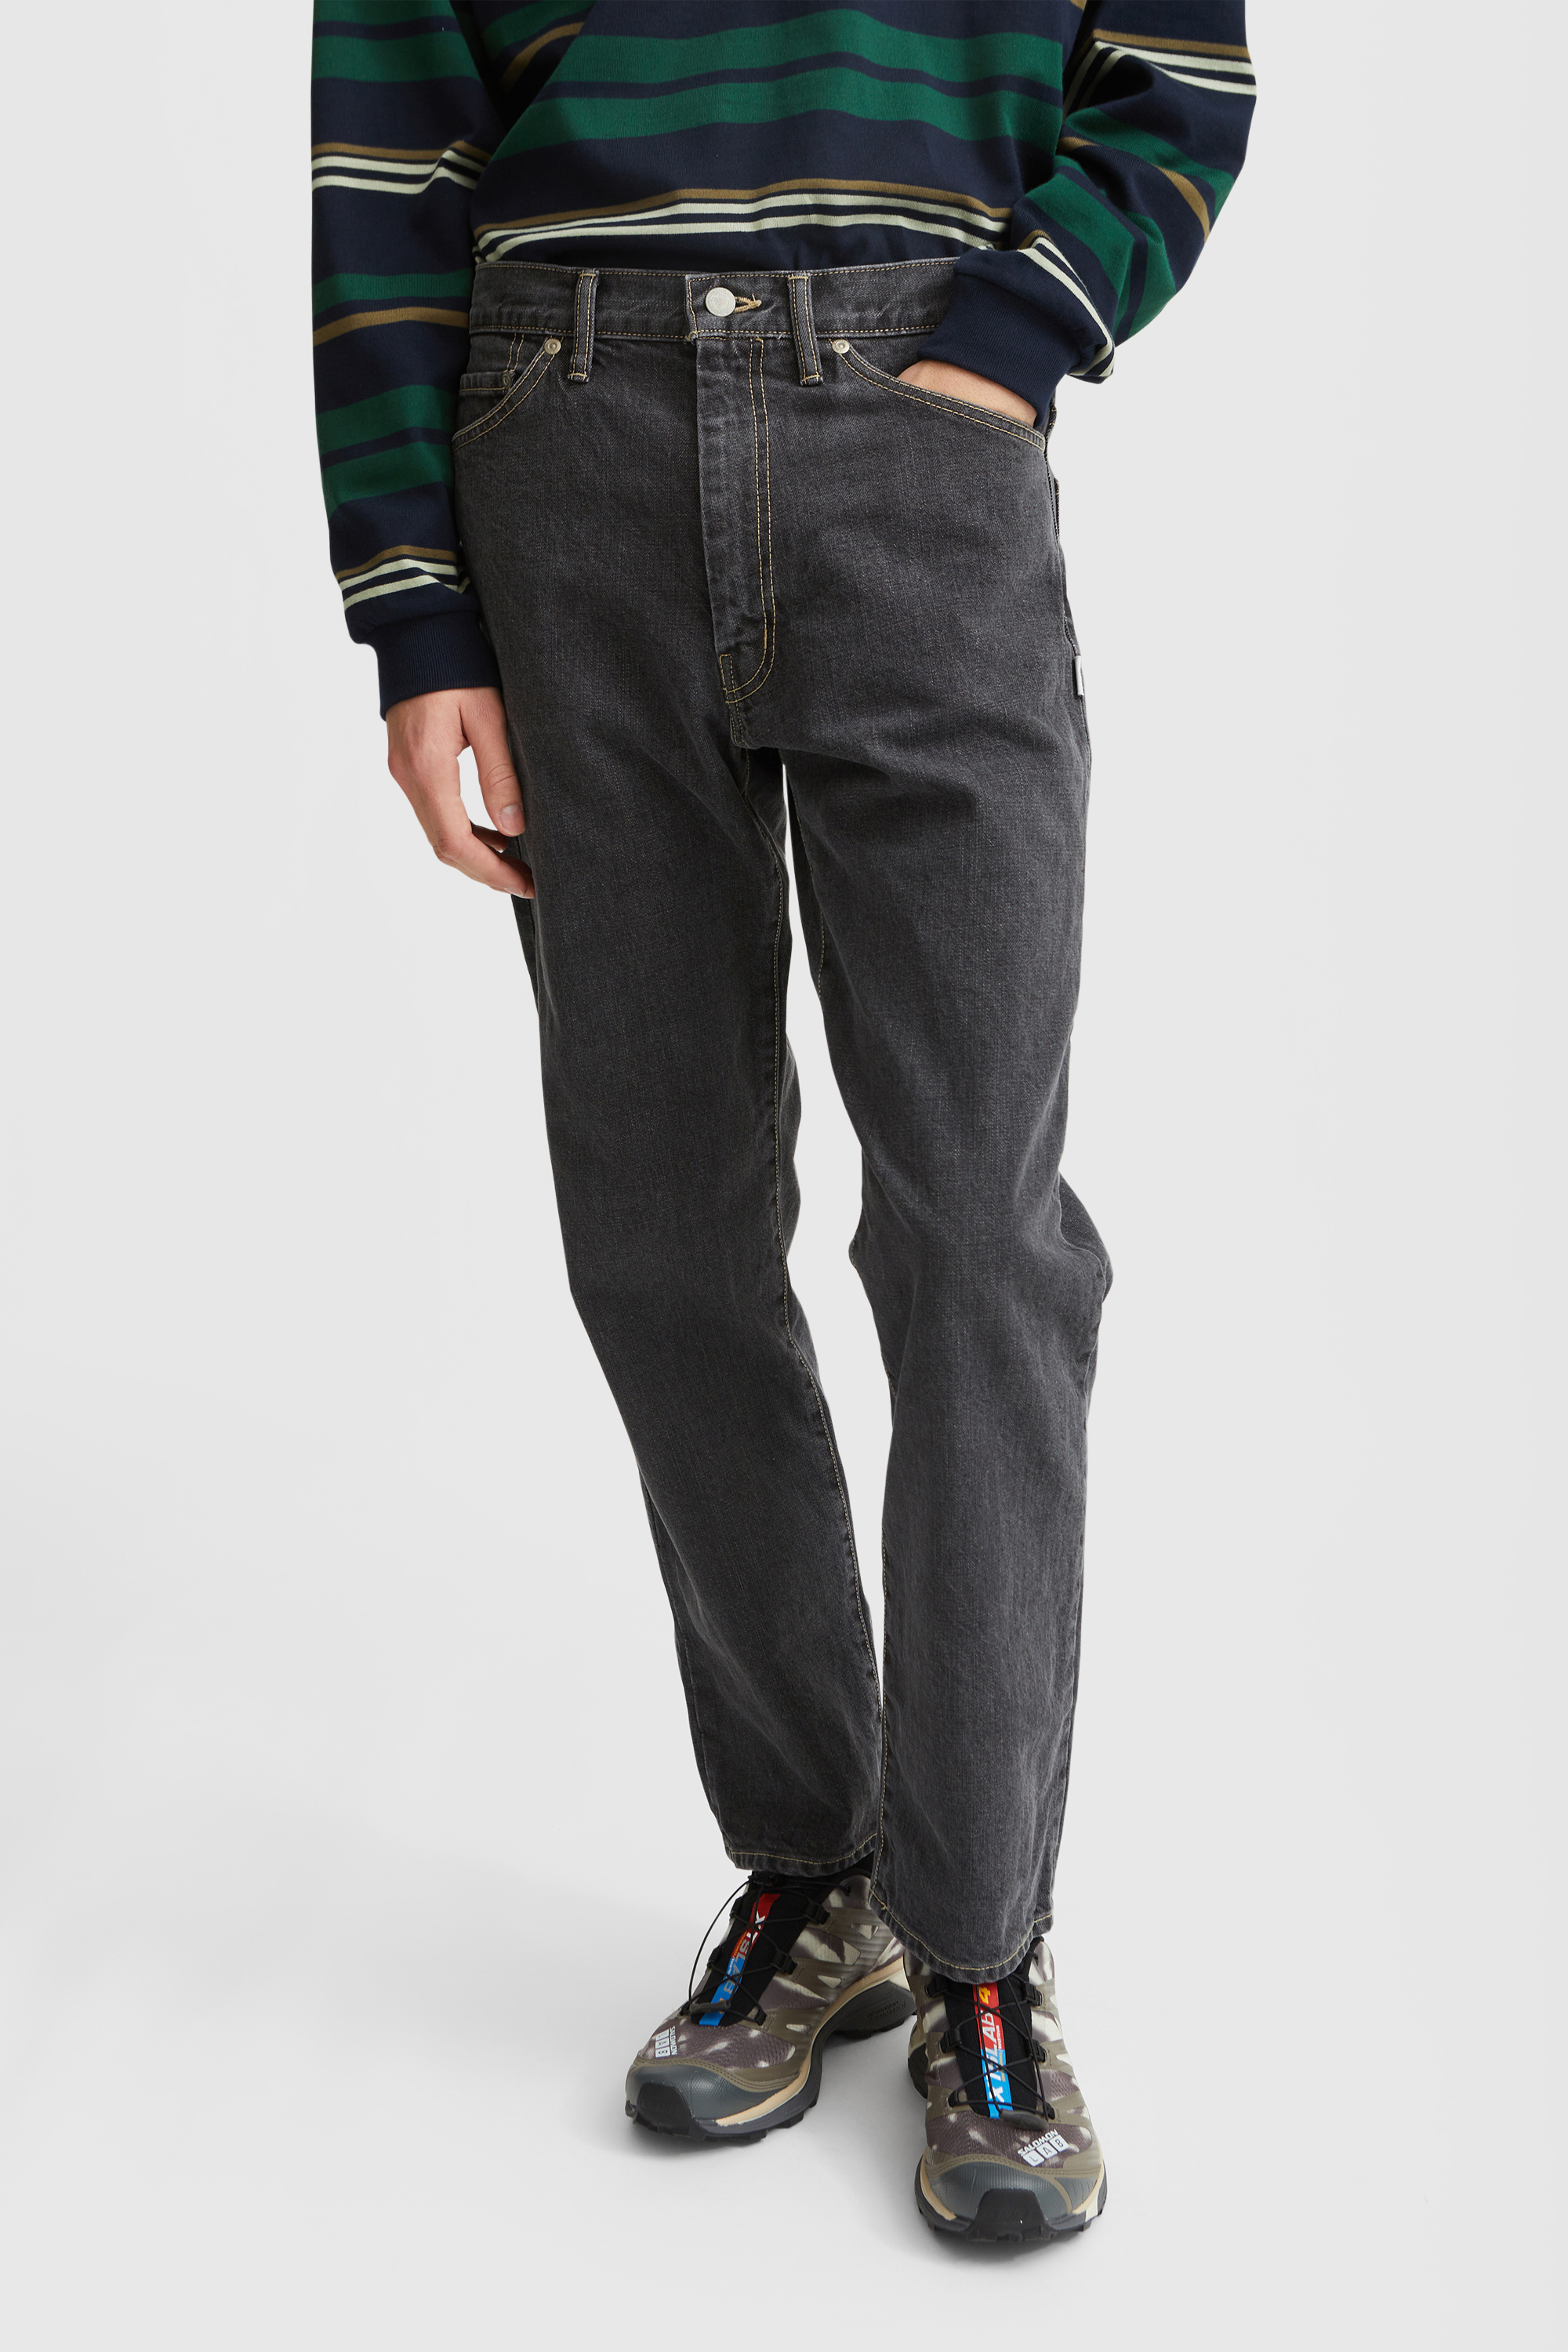 WTAPS BLUES BAGGY / TROUSERS DENIME-